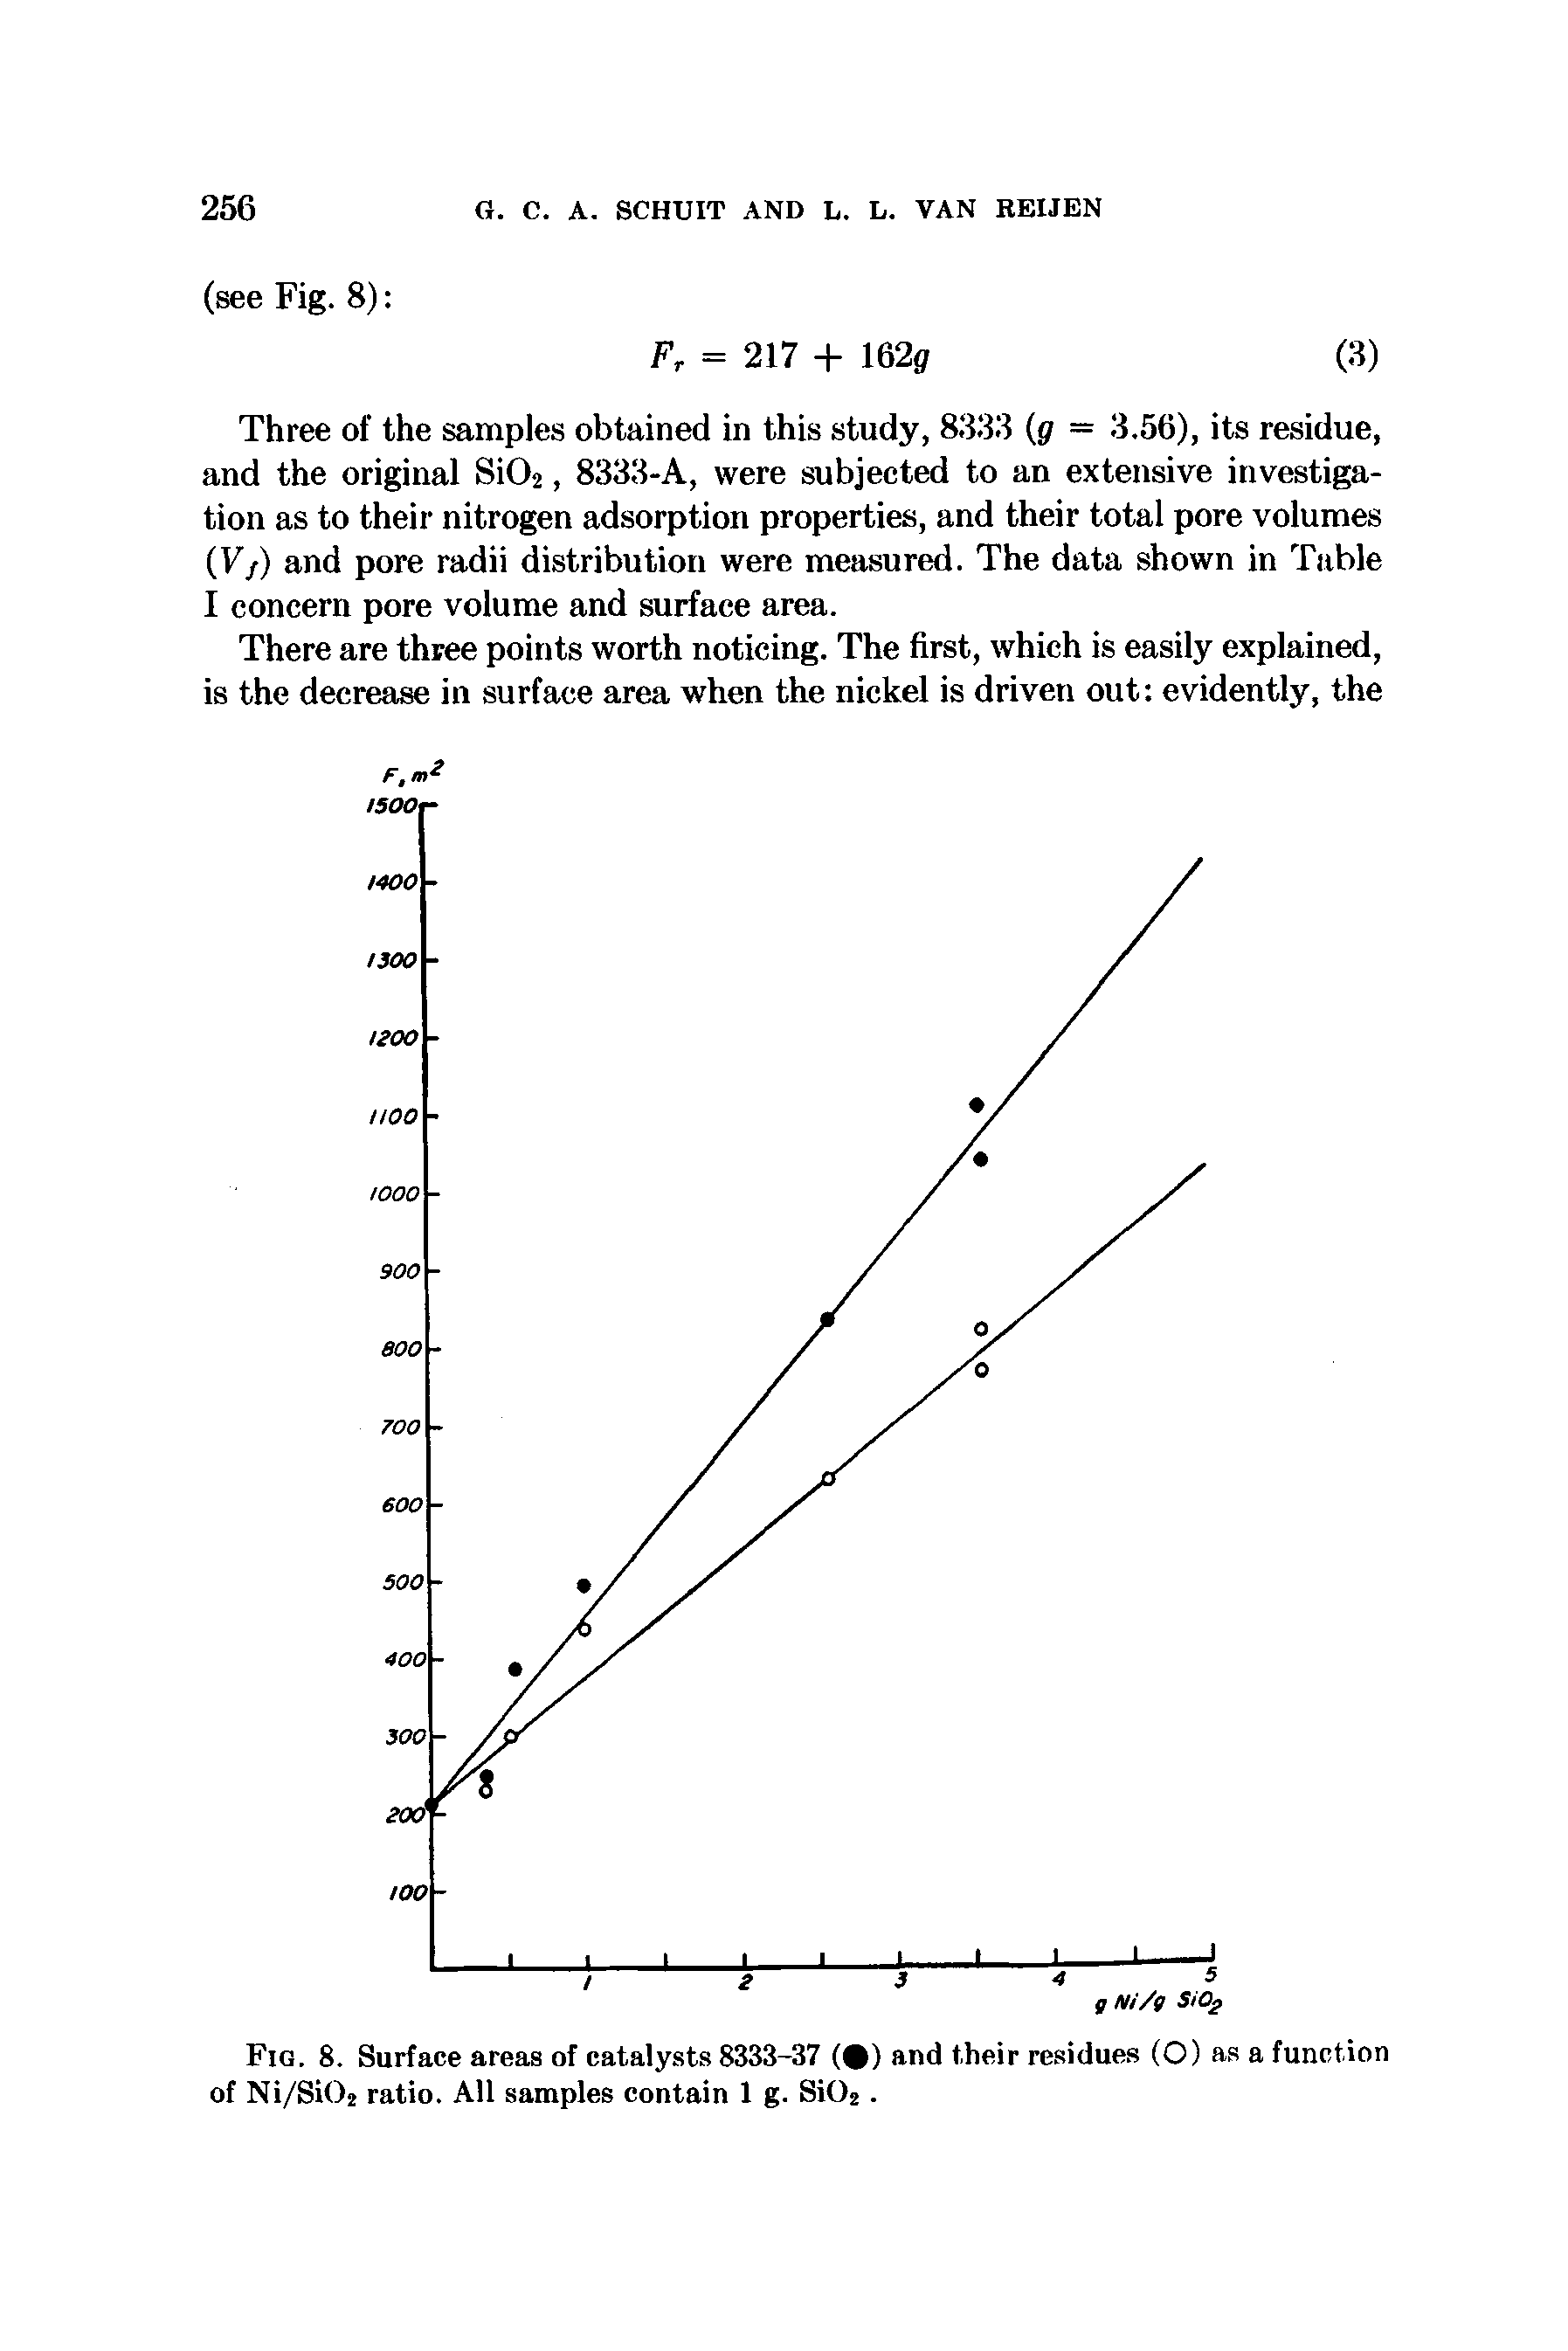 Fig. 8. Surface areas of catalysts 8333-37 ( ) and their residues (O) as a function of Ni/Si02 ratio. All samples contain 1 g. Si02.